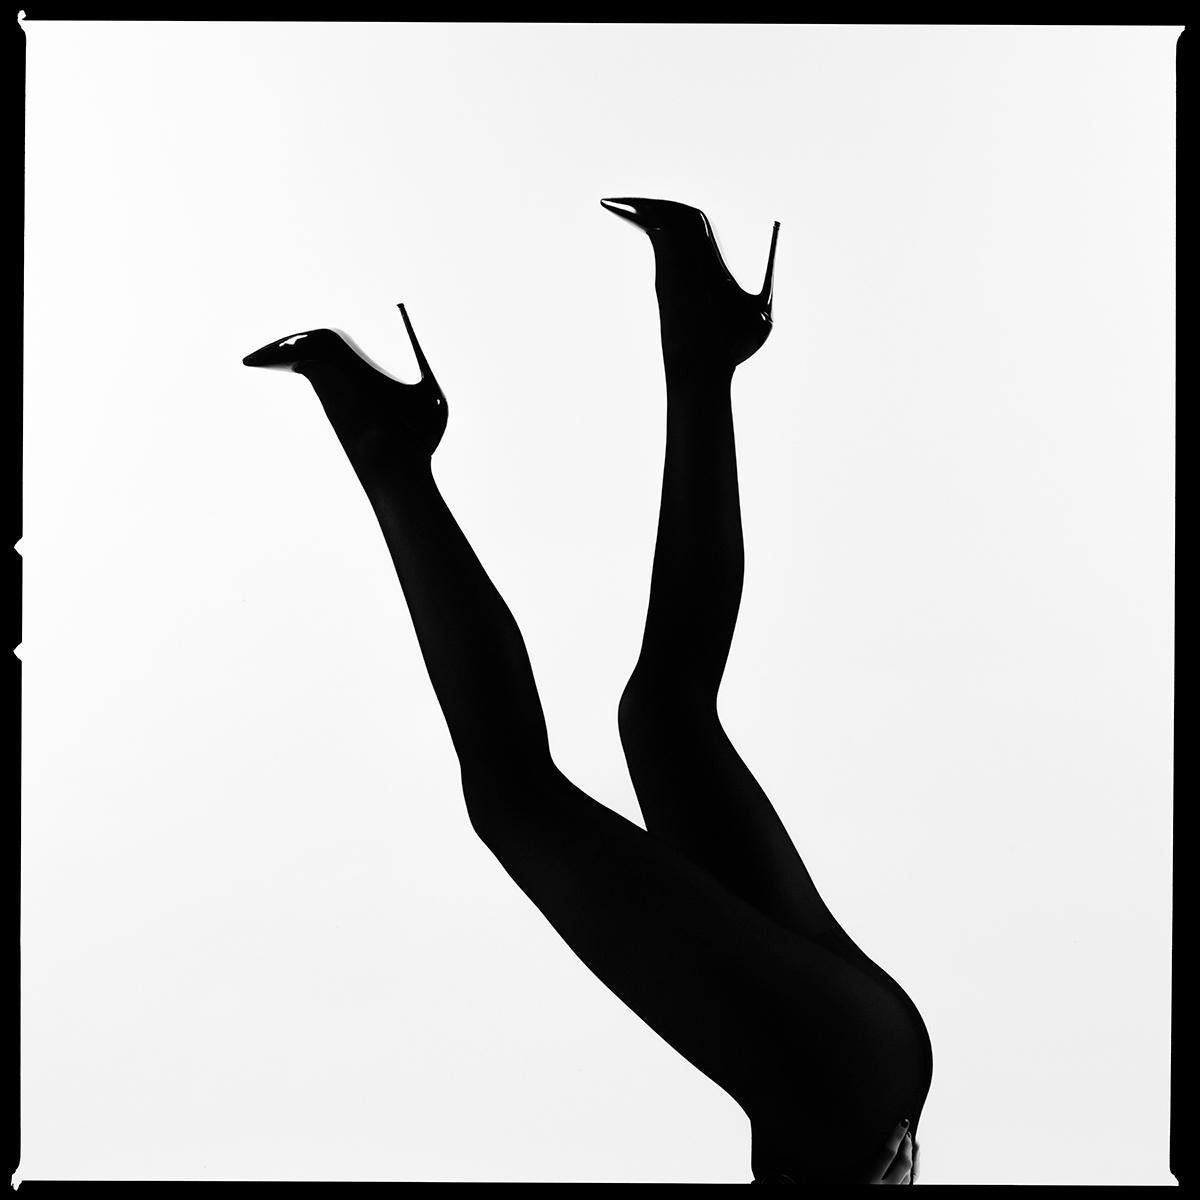 Tyler Shields - Silhouette Up Up, Photographie 2020, Printed After